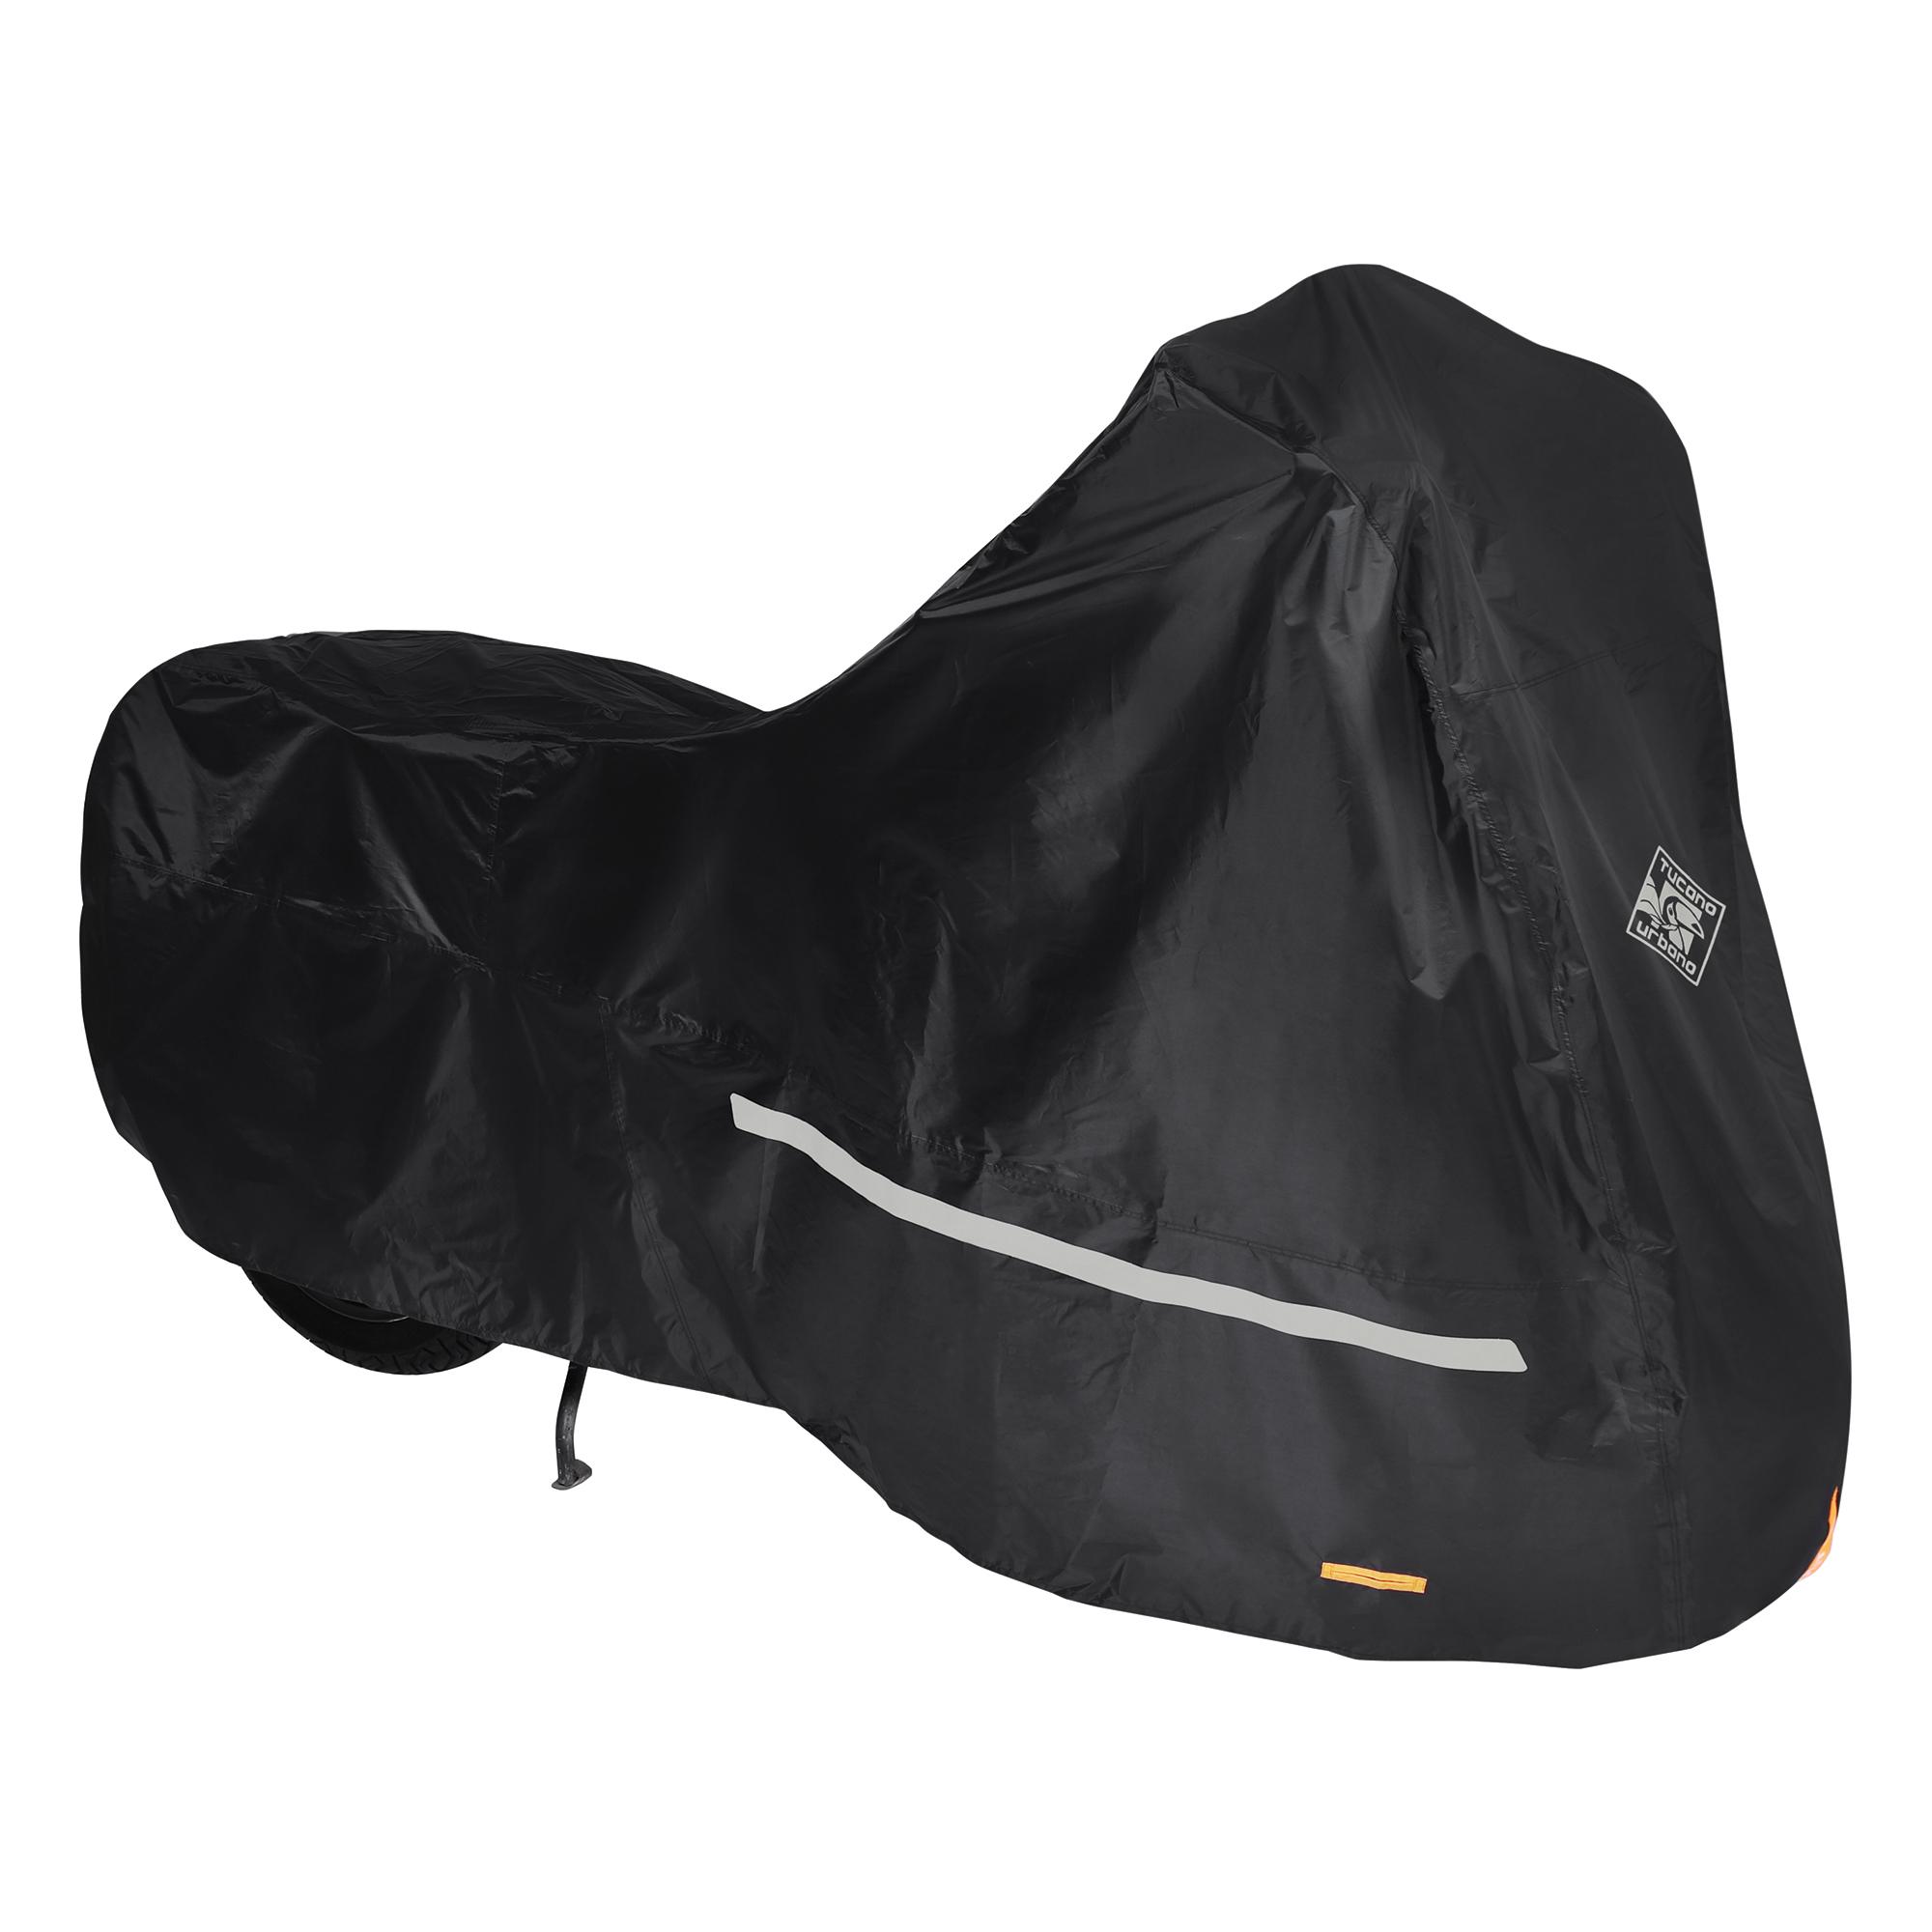 Scooter And Motorcycle Start Covers – For Scooters, Three–wheel And Road Motorcycles Black Tucano Urbano